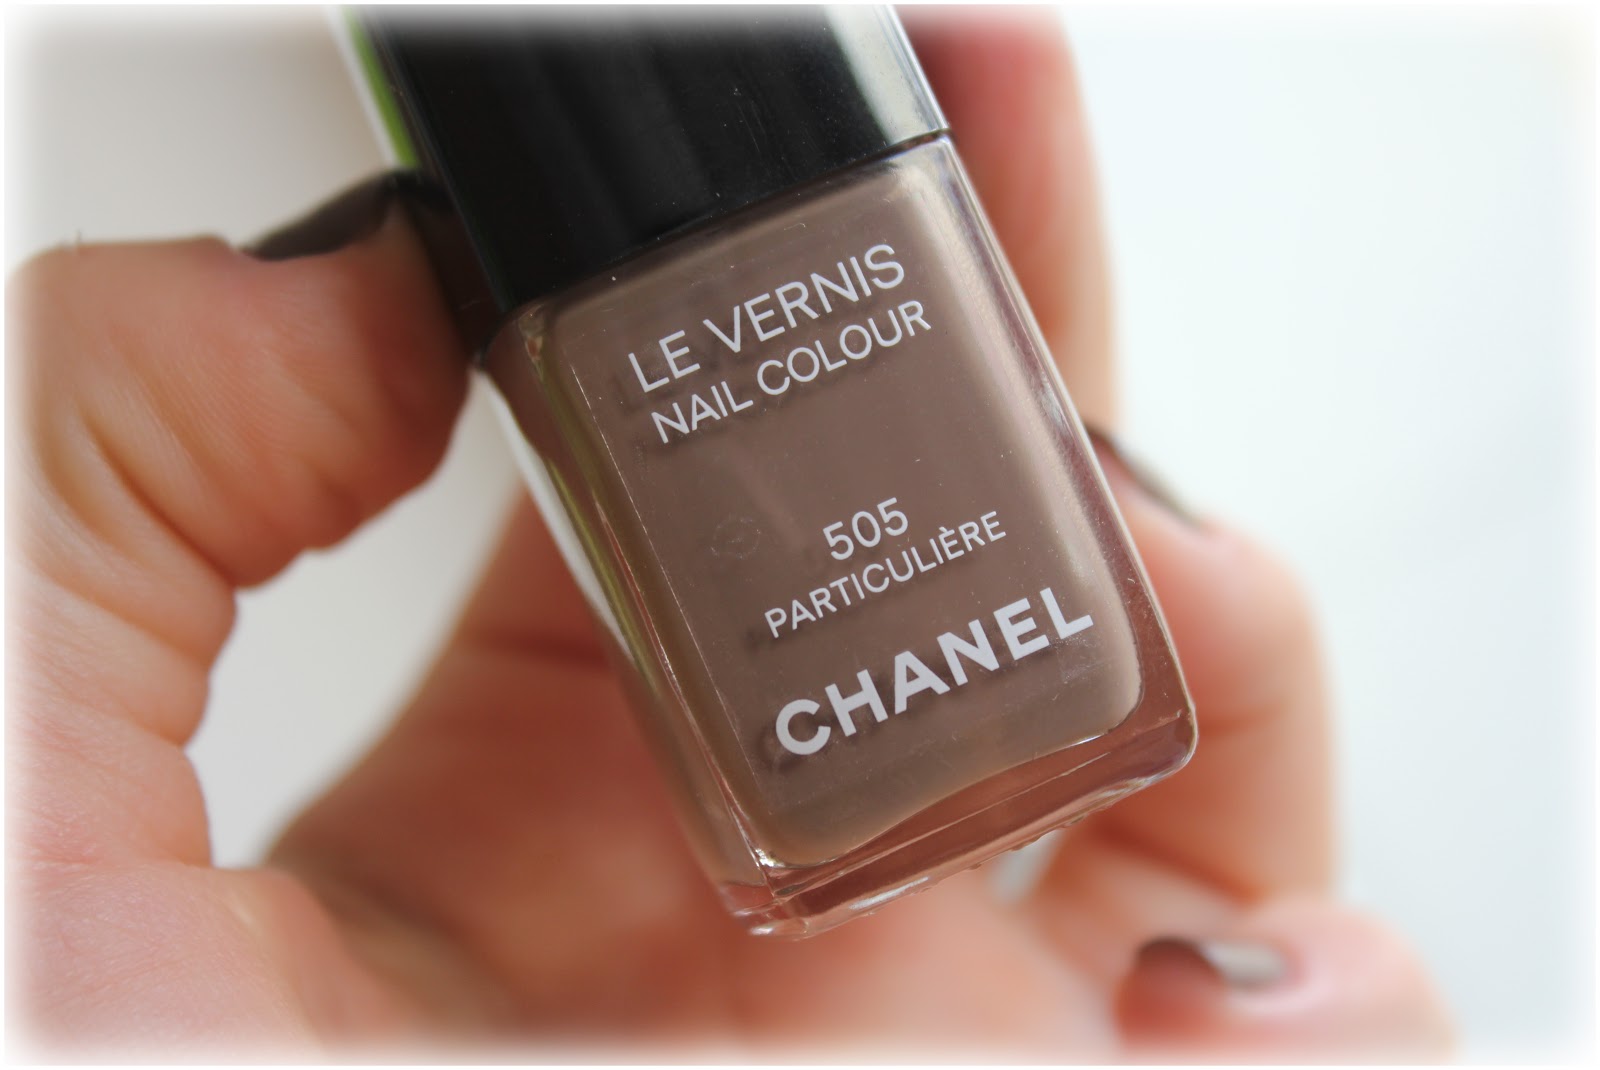 Chanel Le Vernis Longwear Nail Colour in Particuliere - wide 10